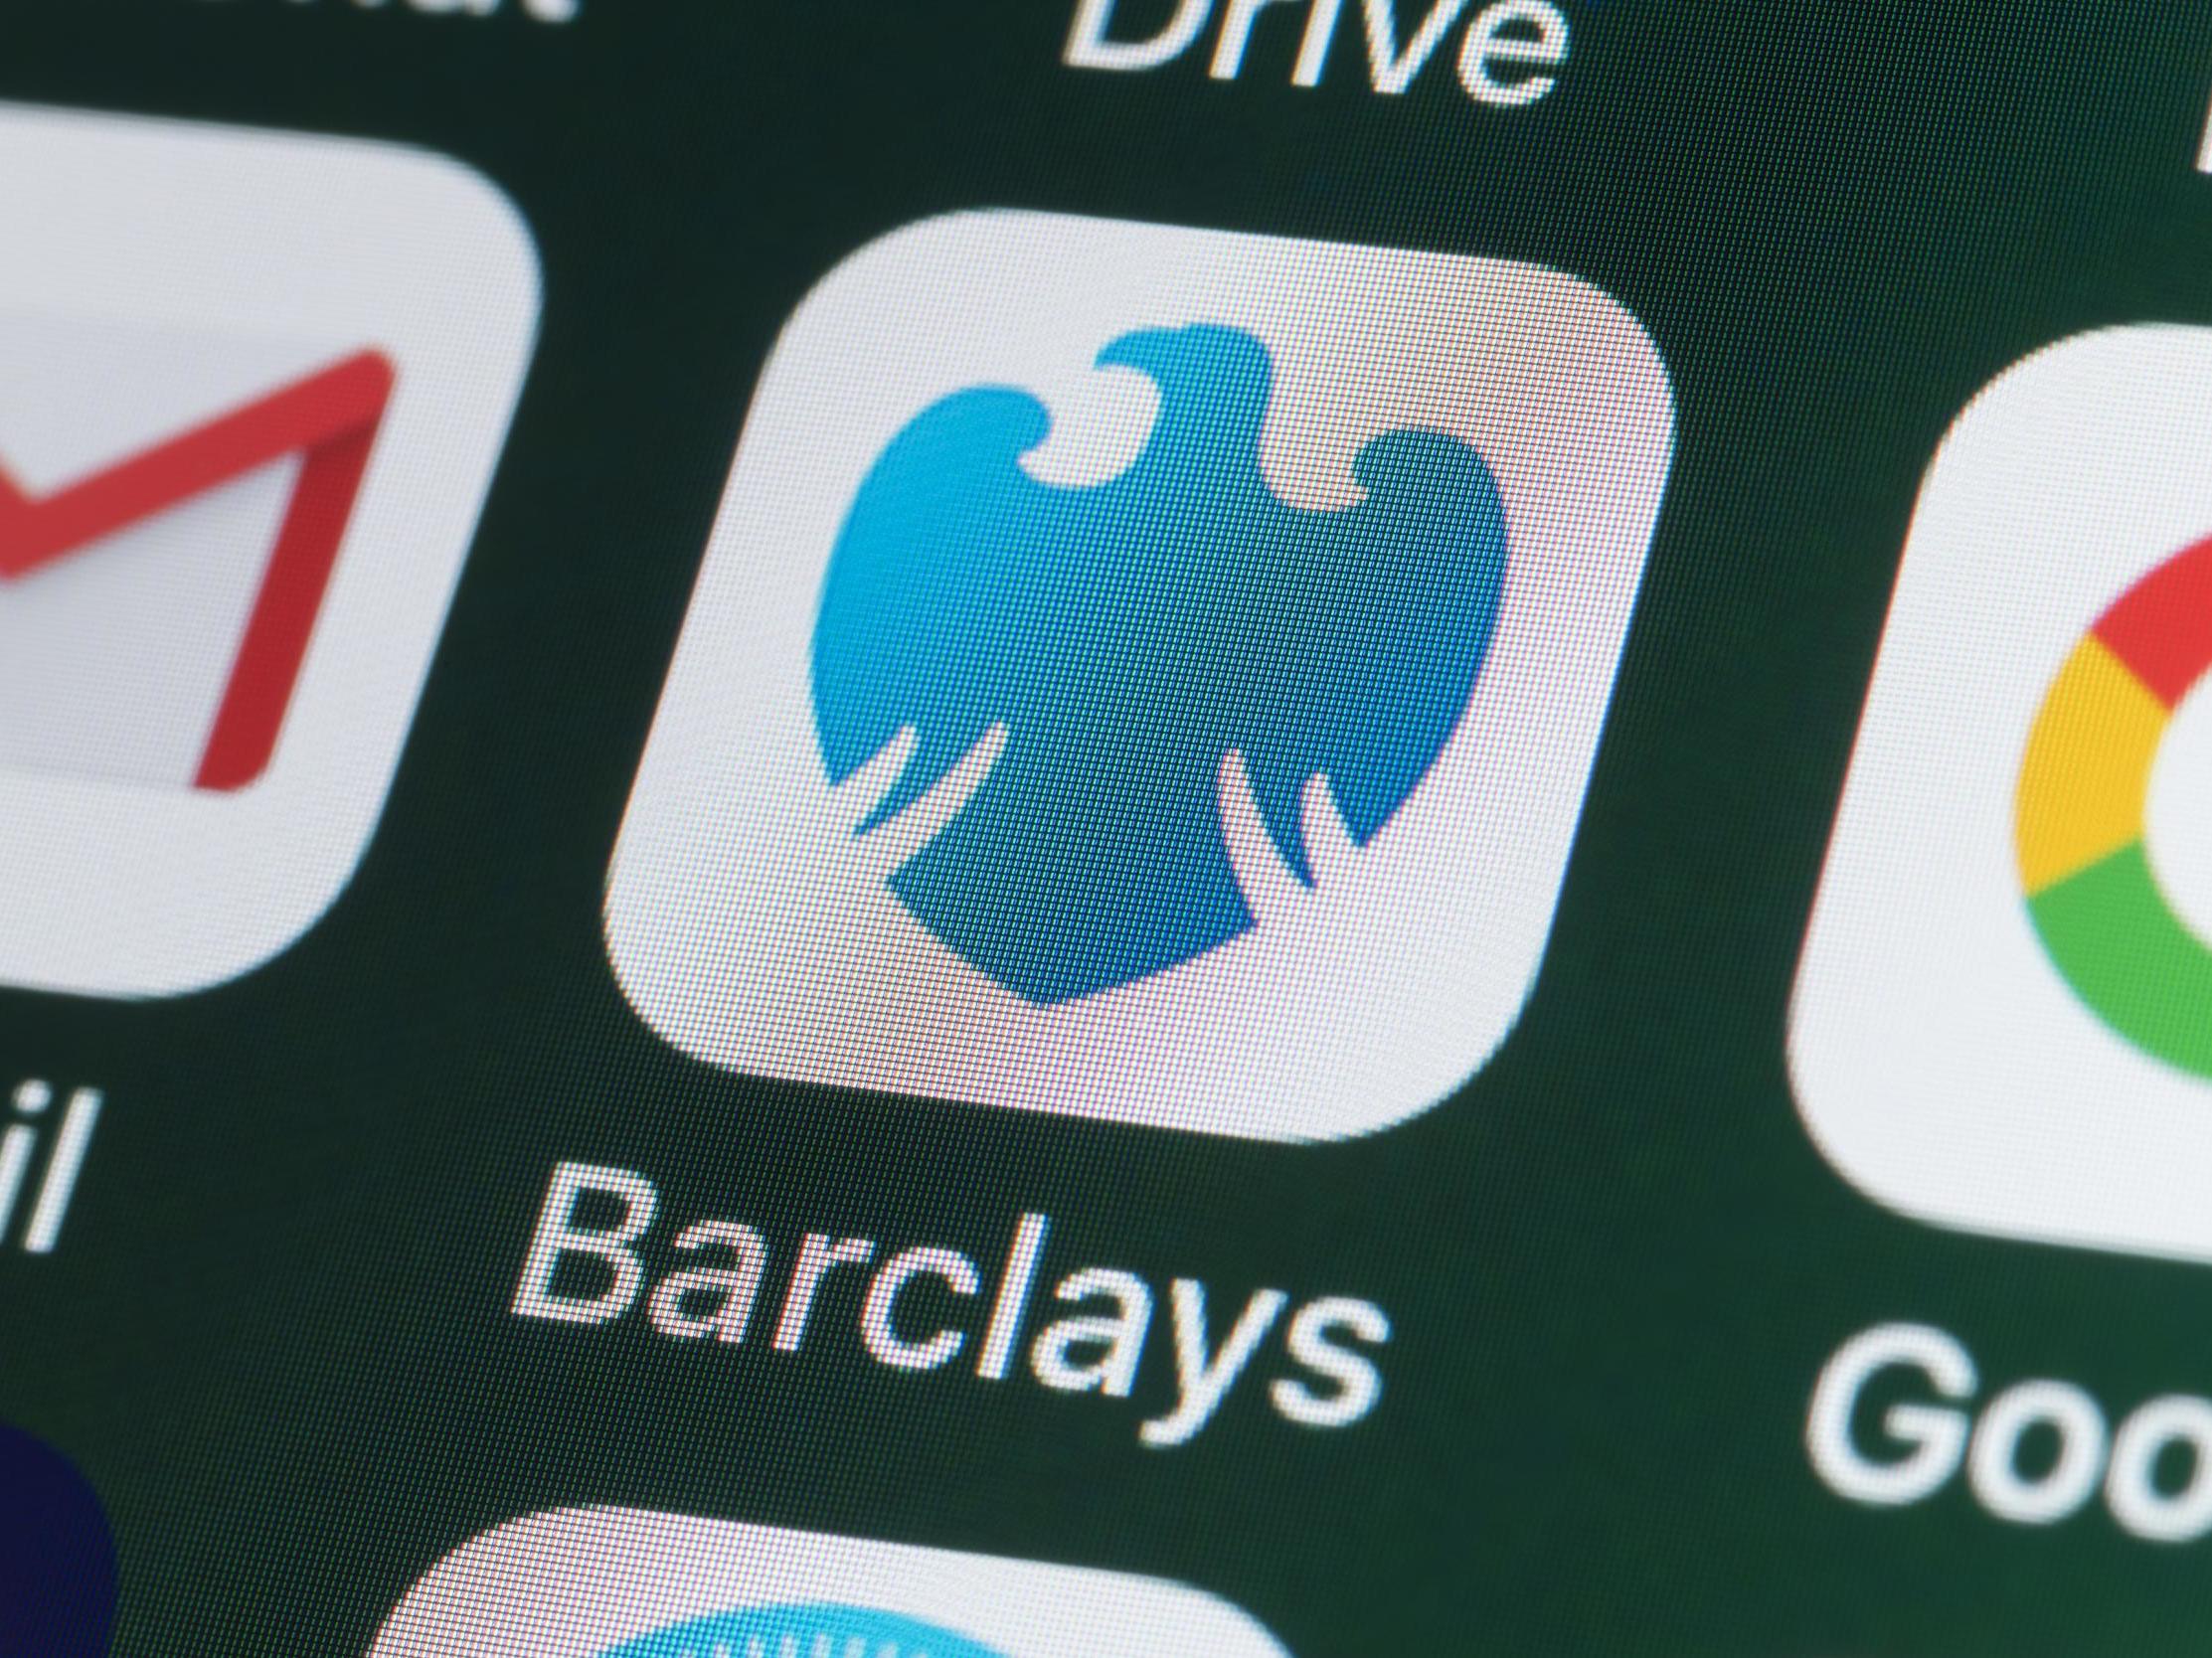 Barclays customers can block payments through their cards to reign in their spending